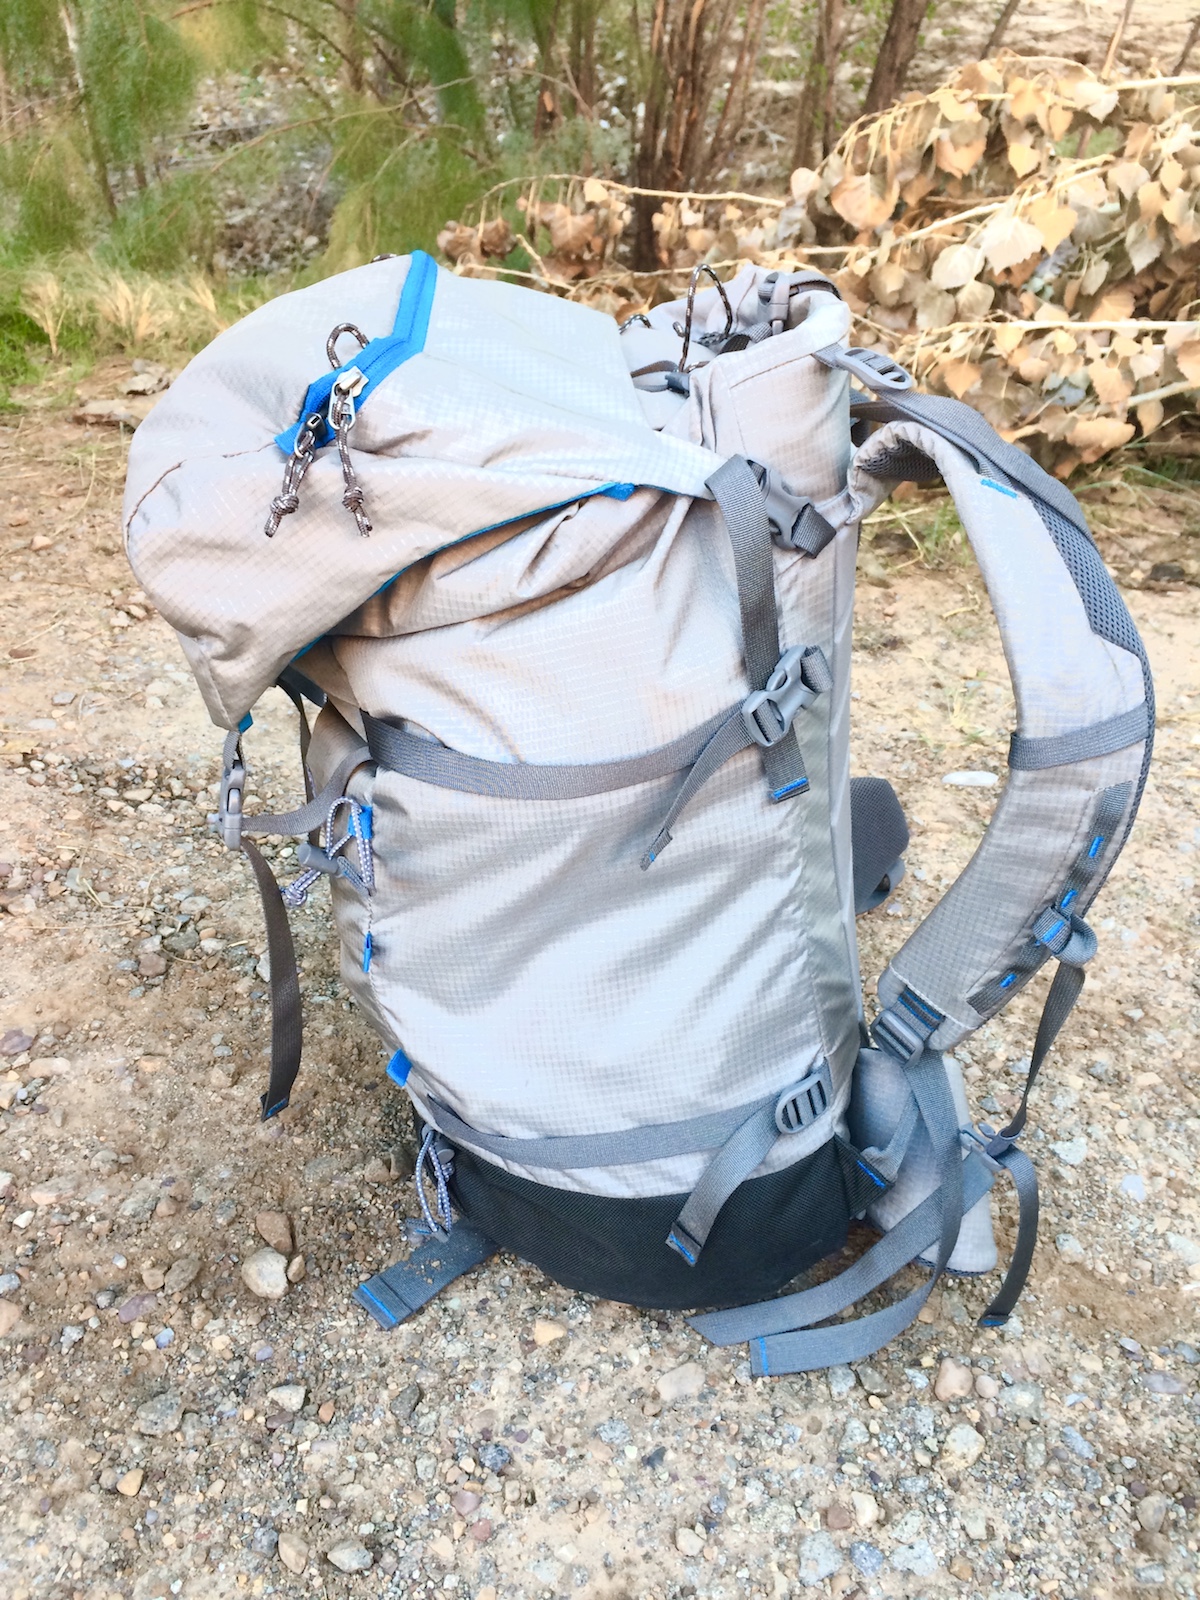 The lid of the Yeti 50L pack flops way over when the pack is not full. [Photo] Mike Lewis